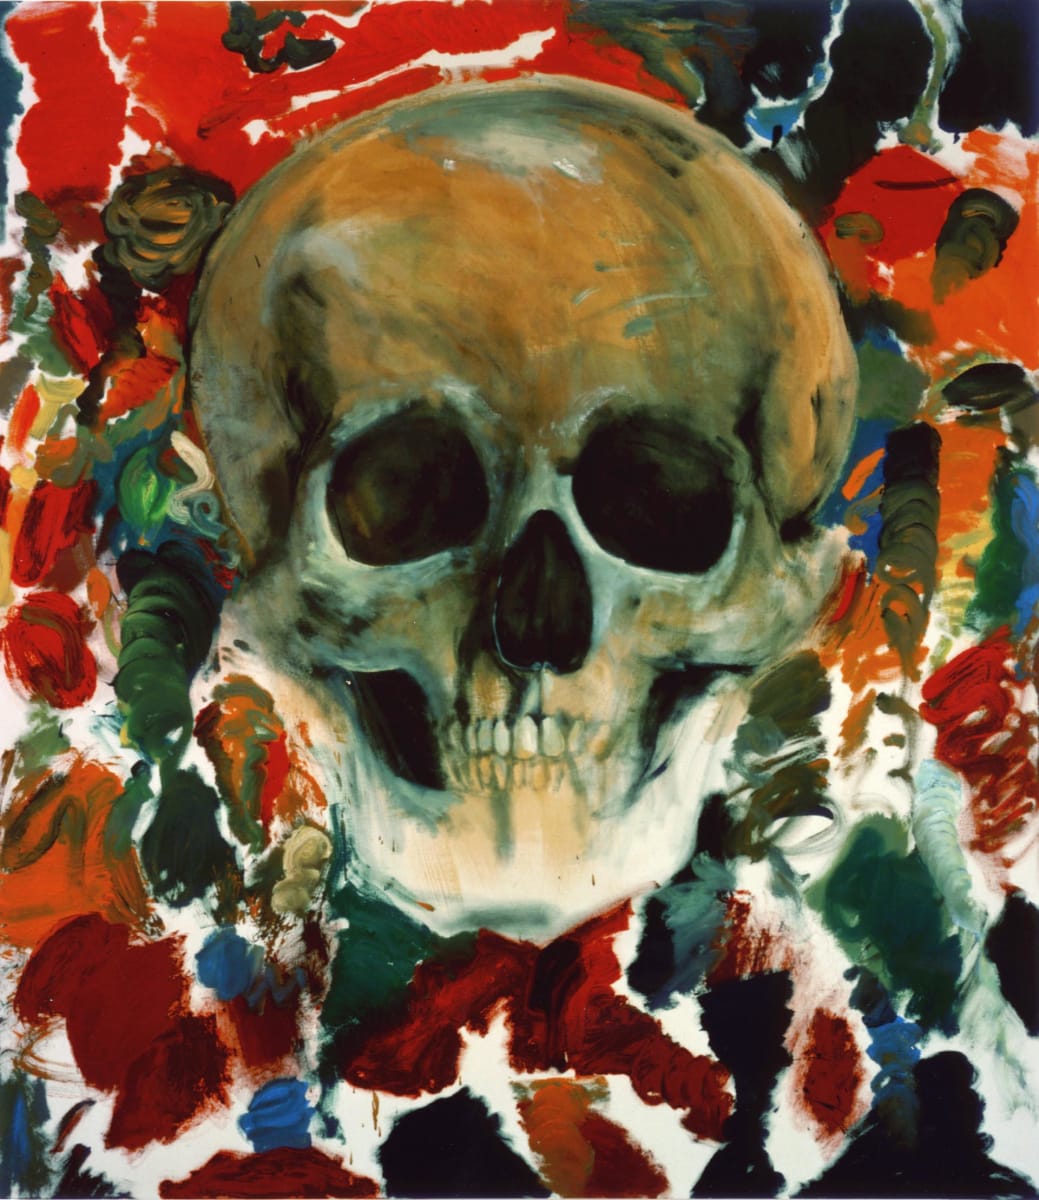 The Face in the Rage of Red by Jim Dine 